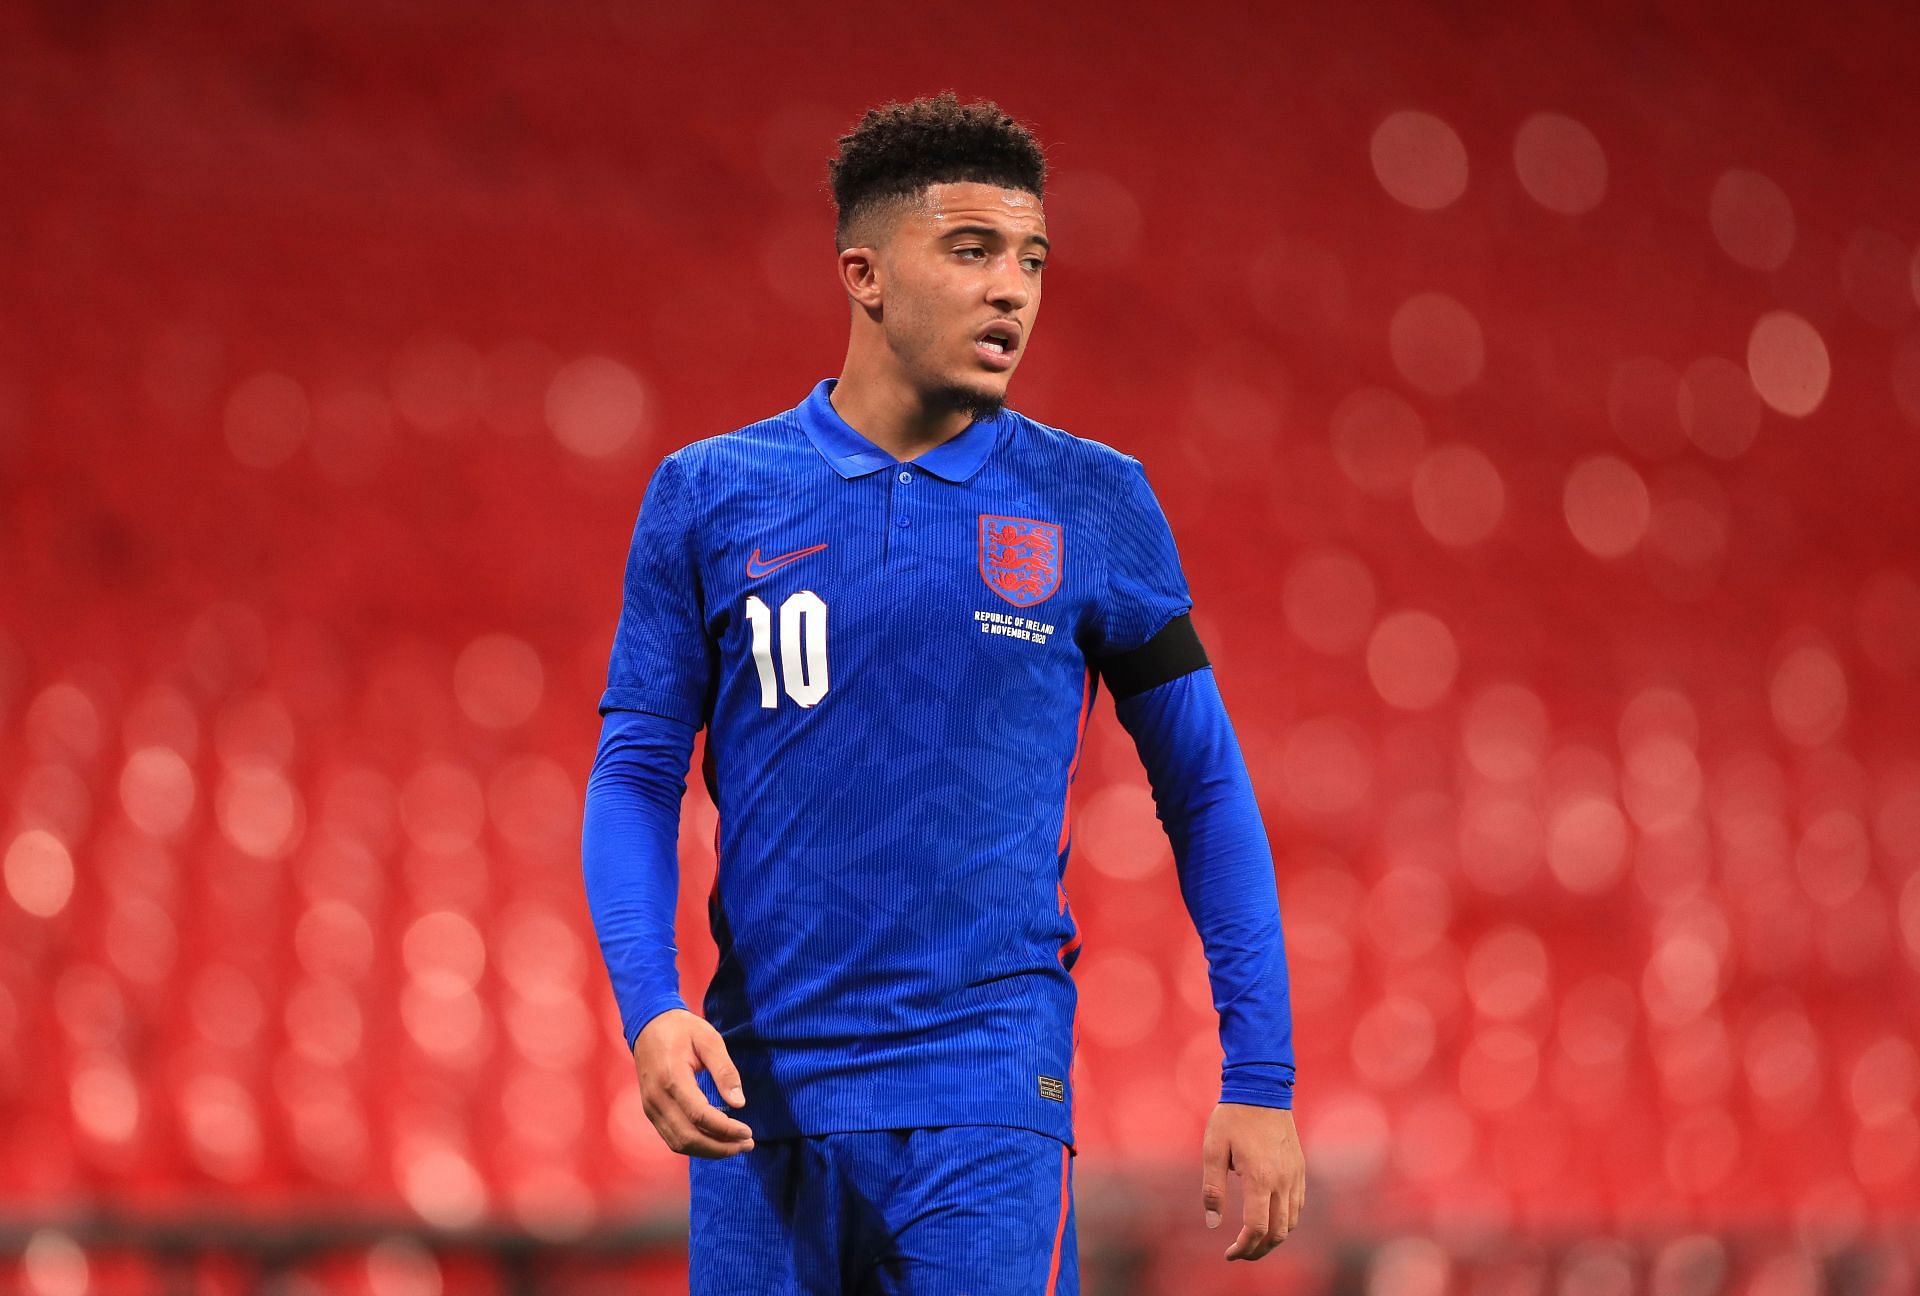 Jadon Sancho in action for England in an international friendly against the Republic of Ireland